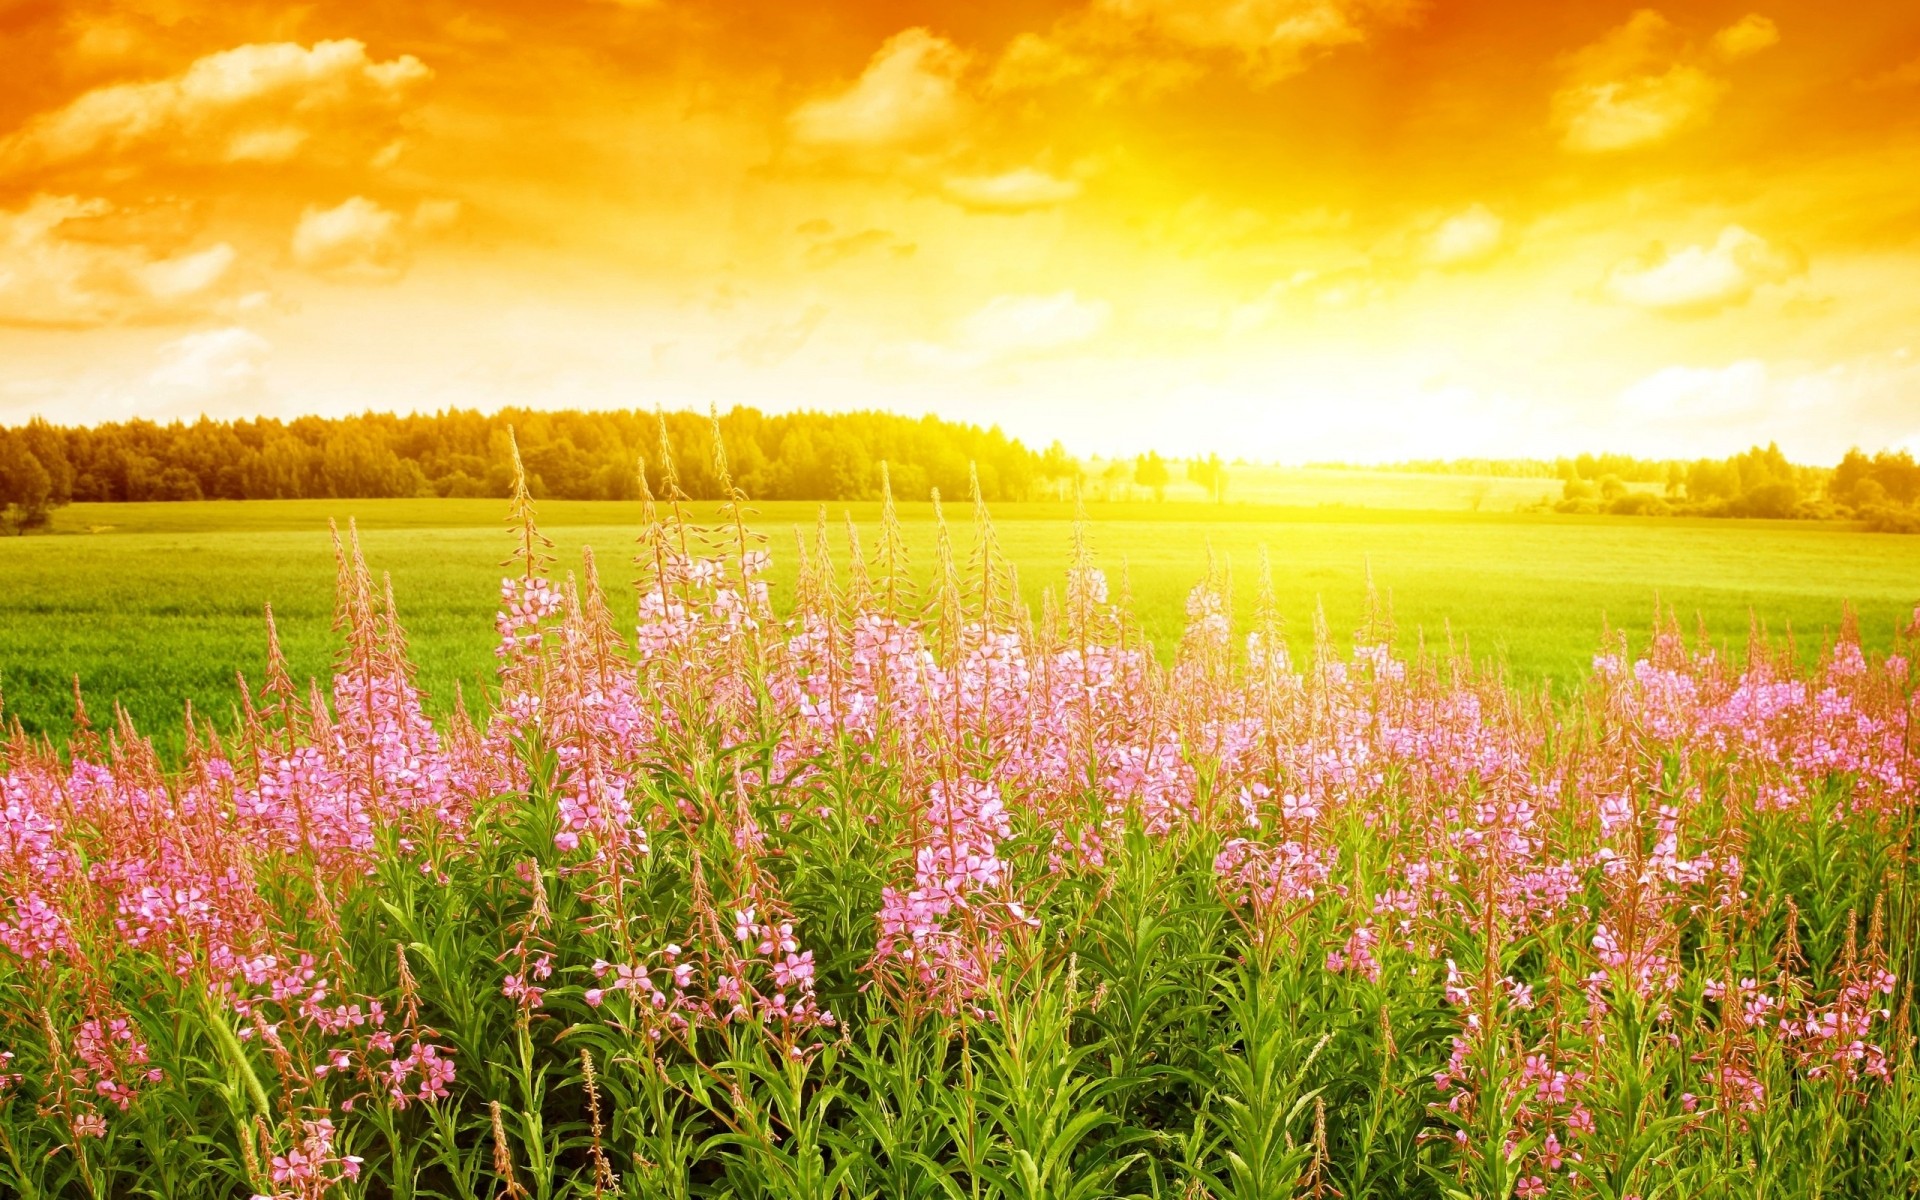 flowers rural nature field summer countryside flower landscape hayfield grass sun flora fair weather bright agriculture outdoors dawn season growth pasture scenery background sky